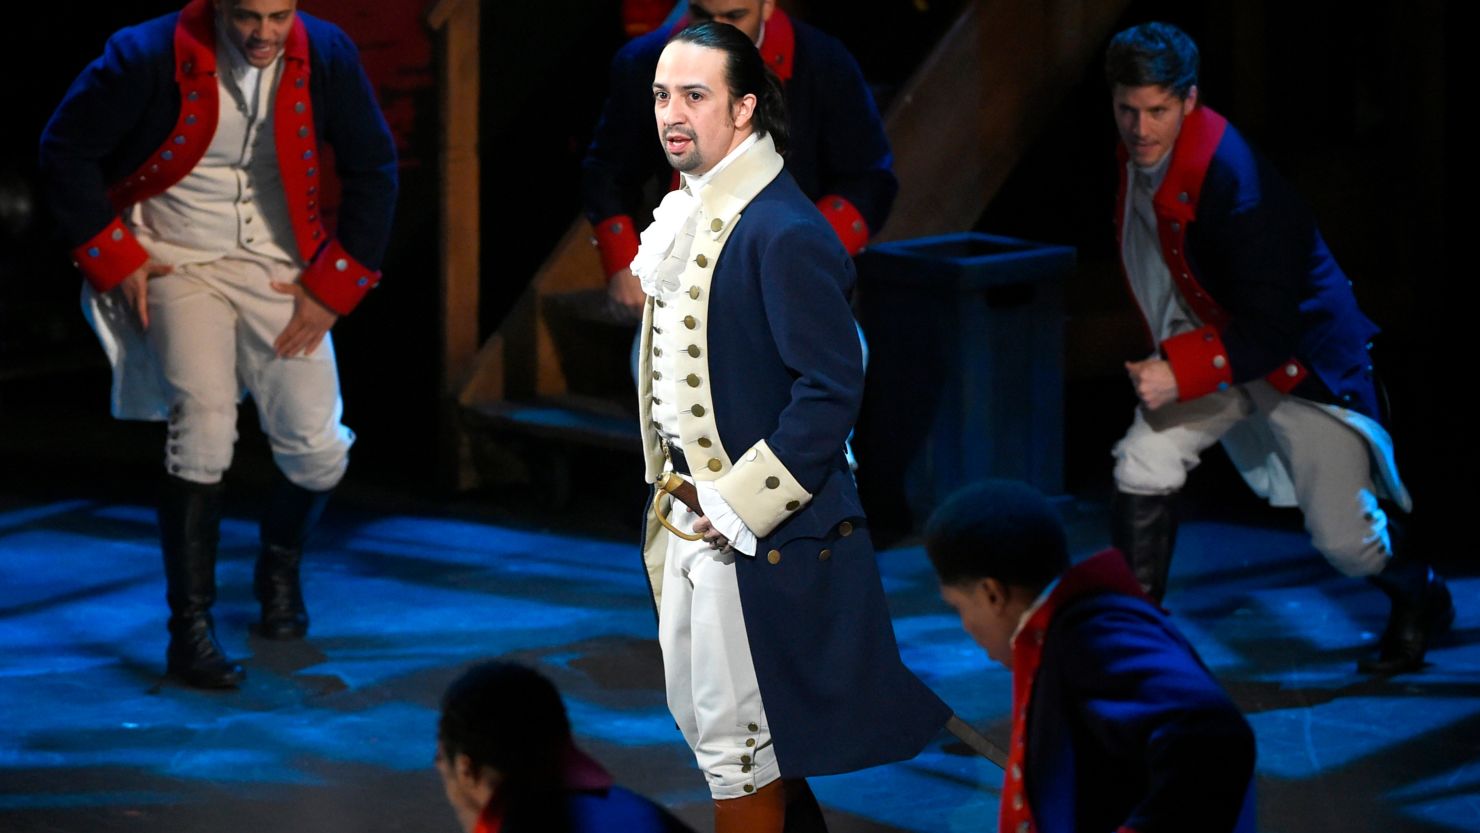 FILE - In this June 12, 2016 file photo, Lin-Manuel Miranda and the cast of "Hamilton" perform at the Tony Awards in New York. A filmed version of the original Broadway production will be available Friday, July 3, on Disney Plus. (Photo by Evan Agostini/Invision/AP, File)